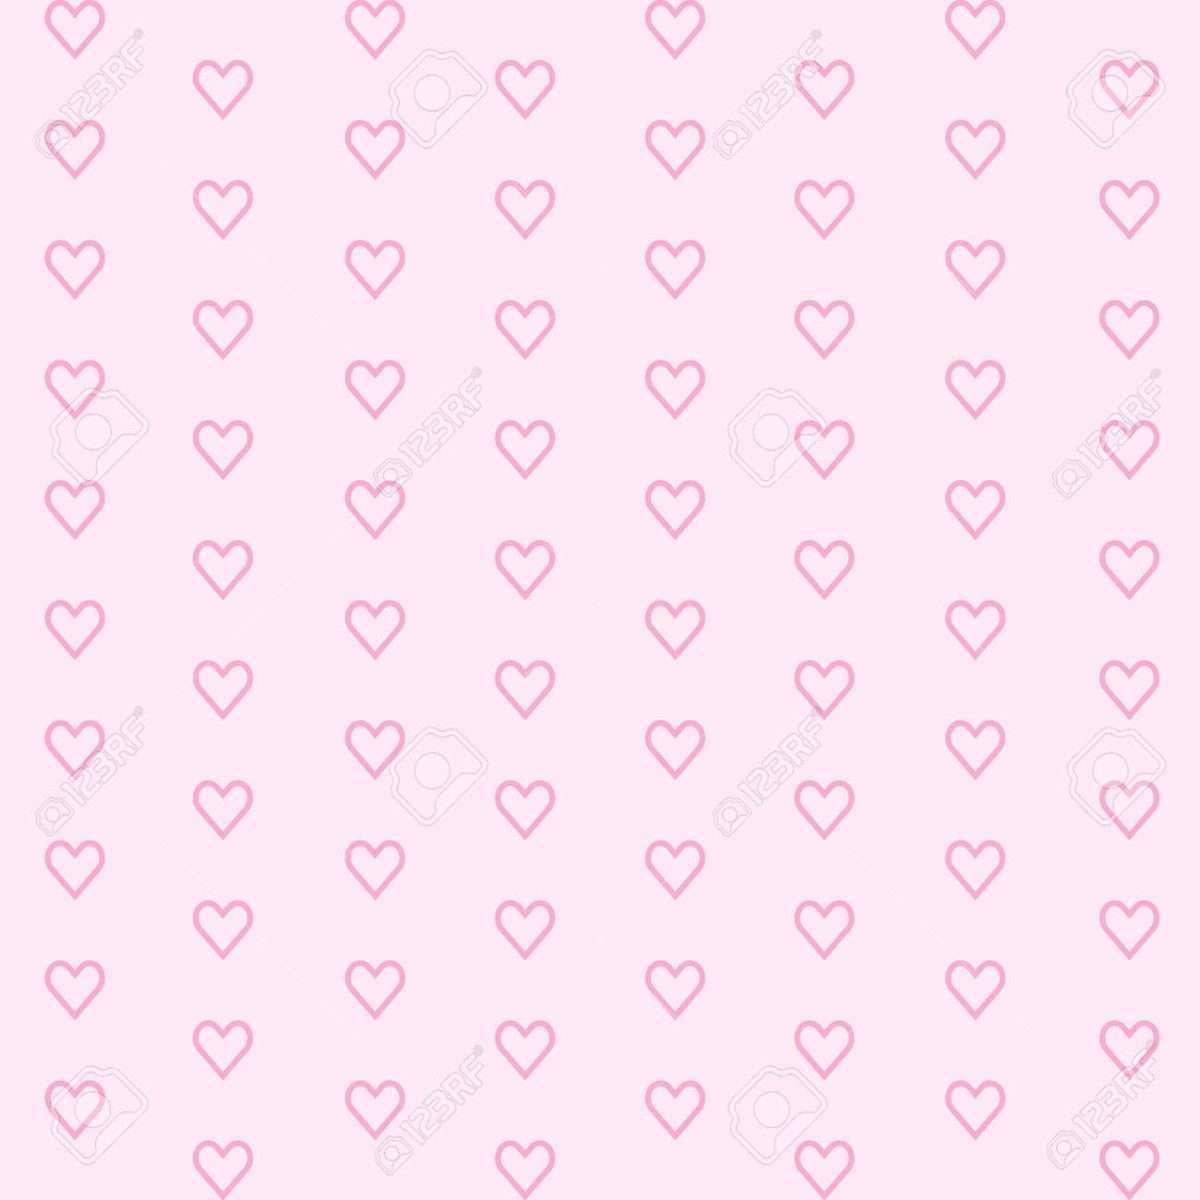 122158454-pink-background-with-hearts-for-web-page-backgrounds-textile-designs-fills-banners-min